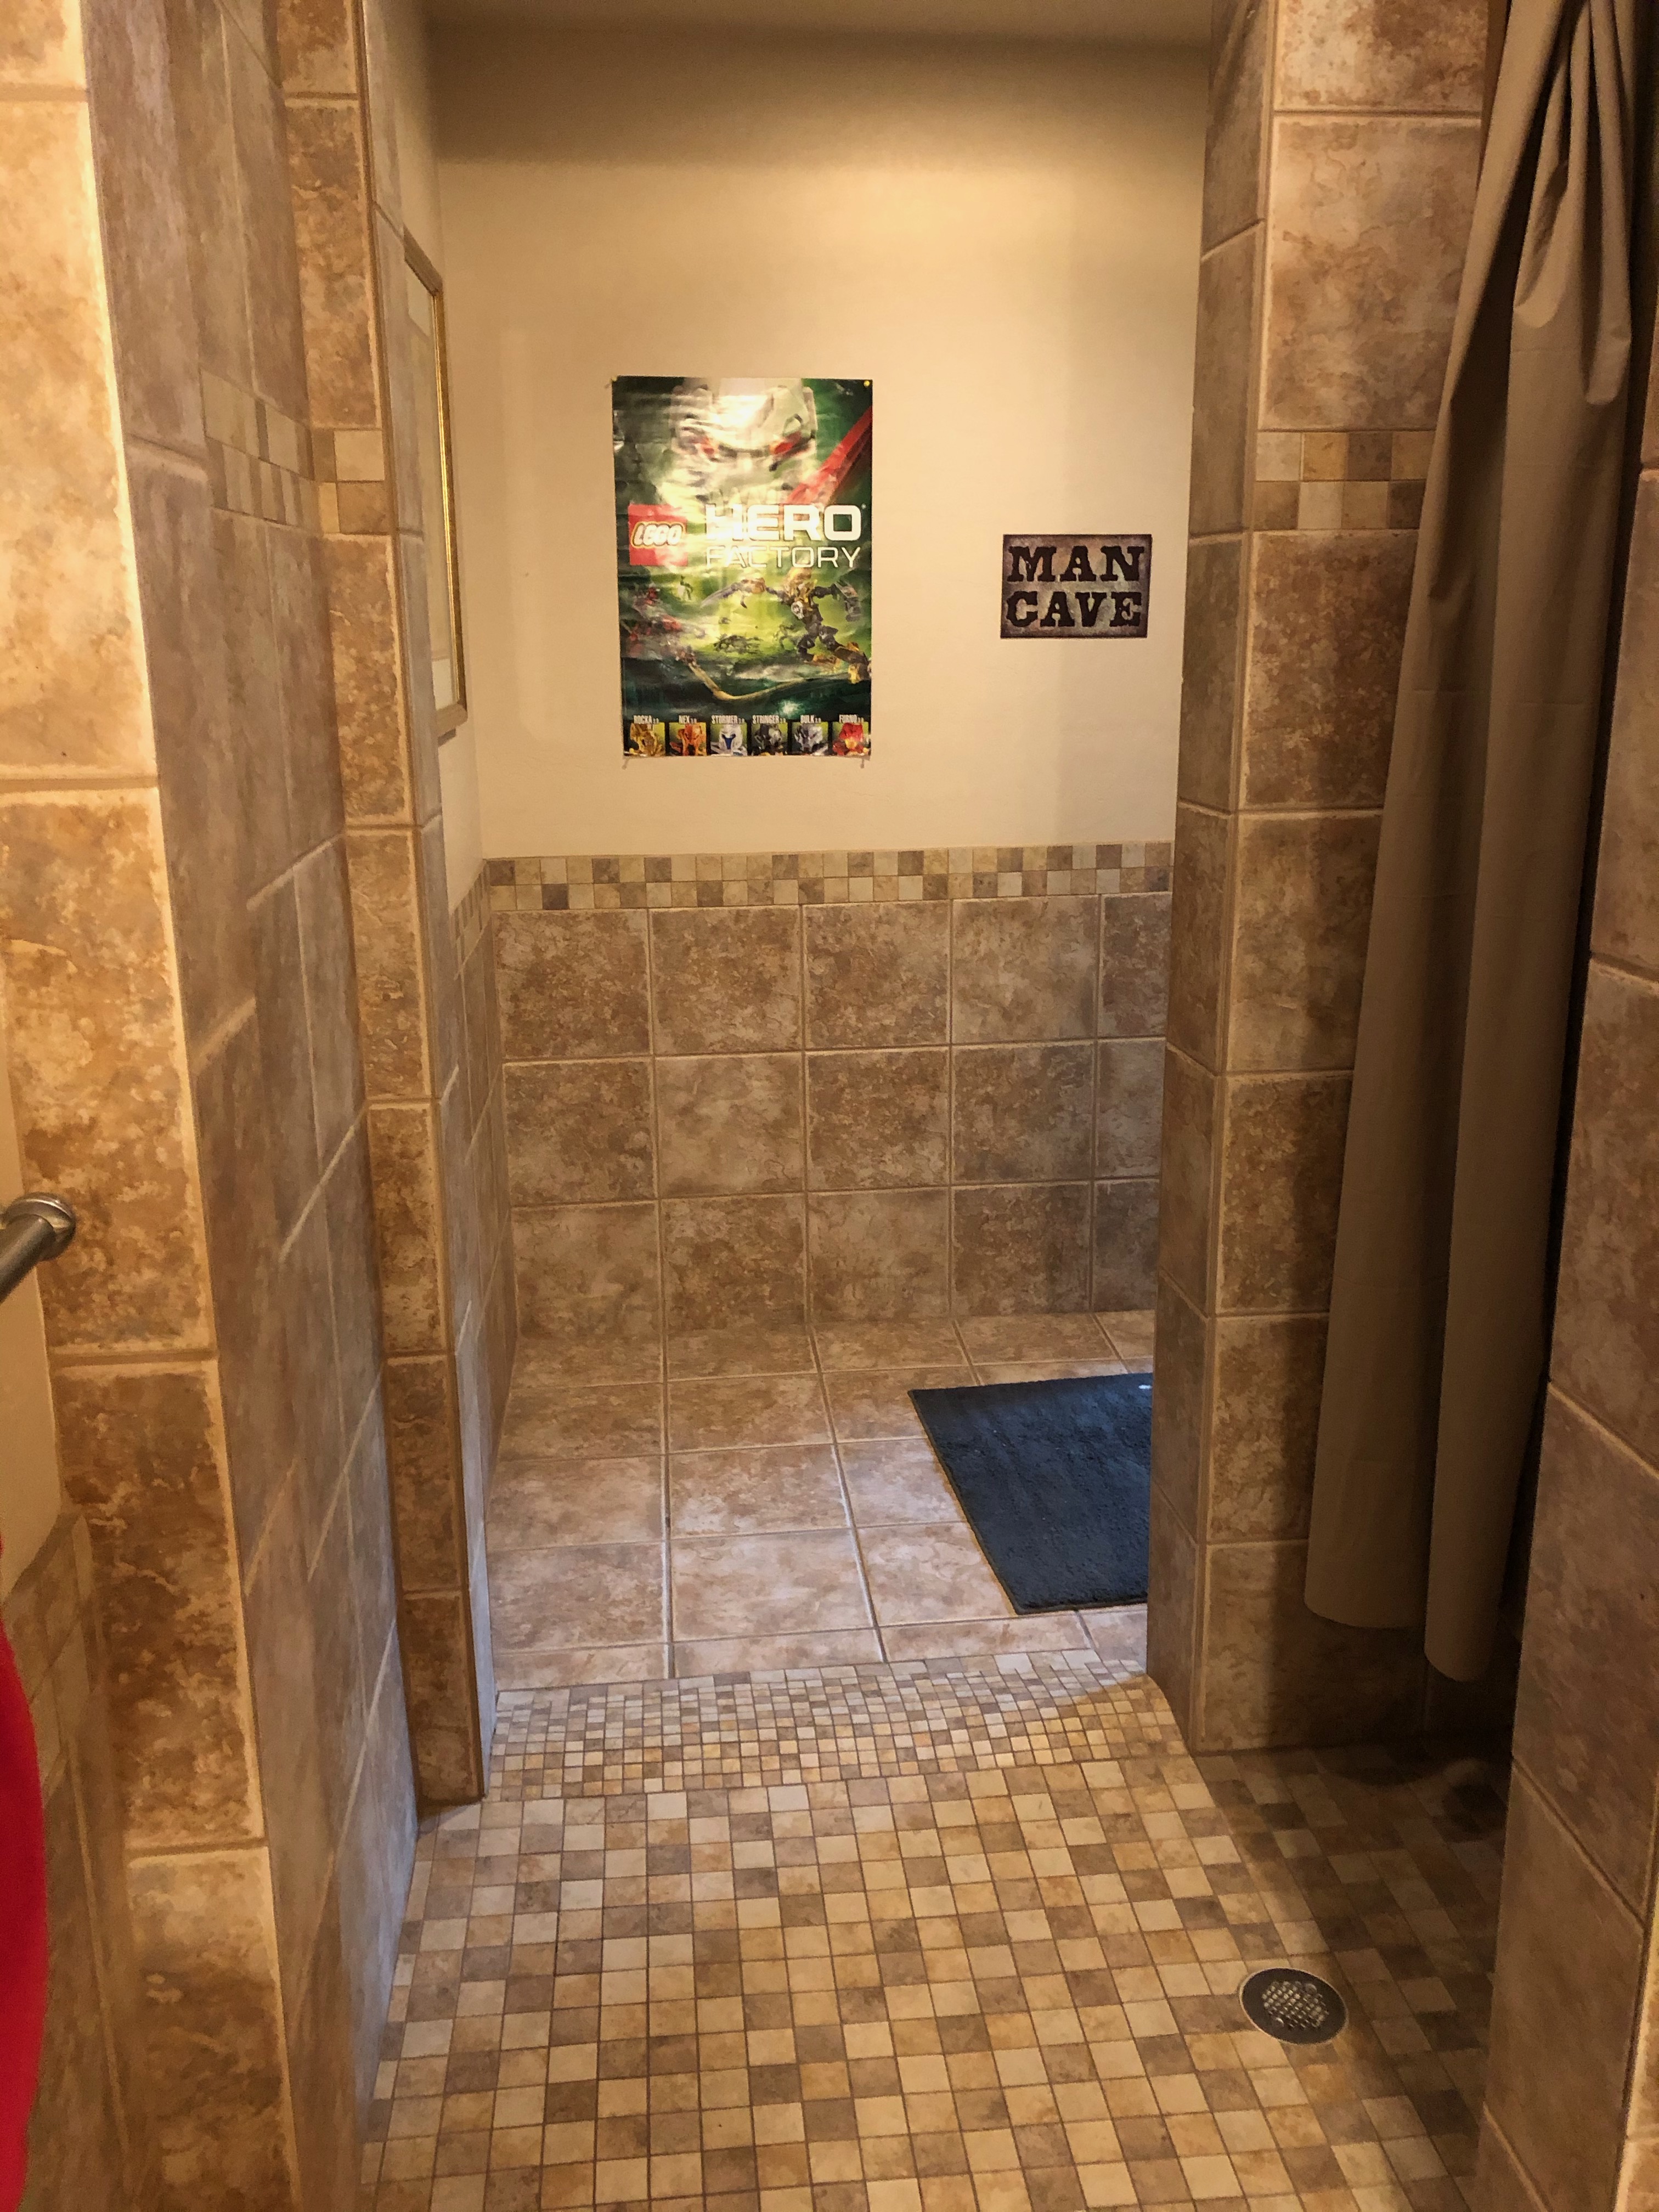 Mancave pathway from the bathroom